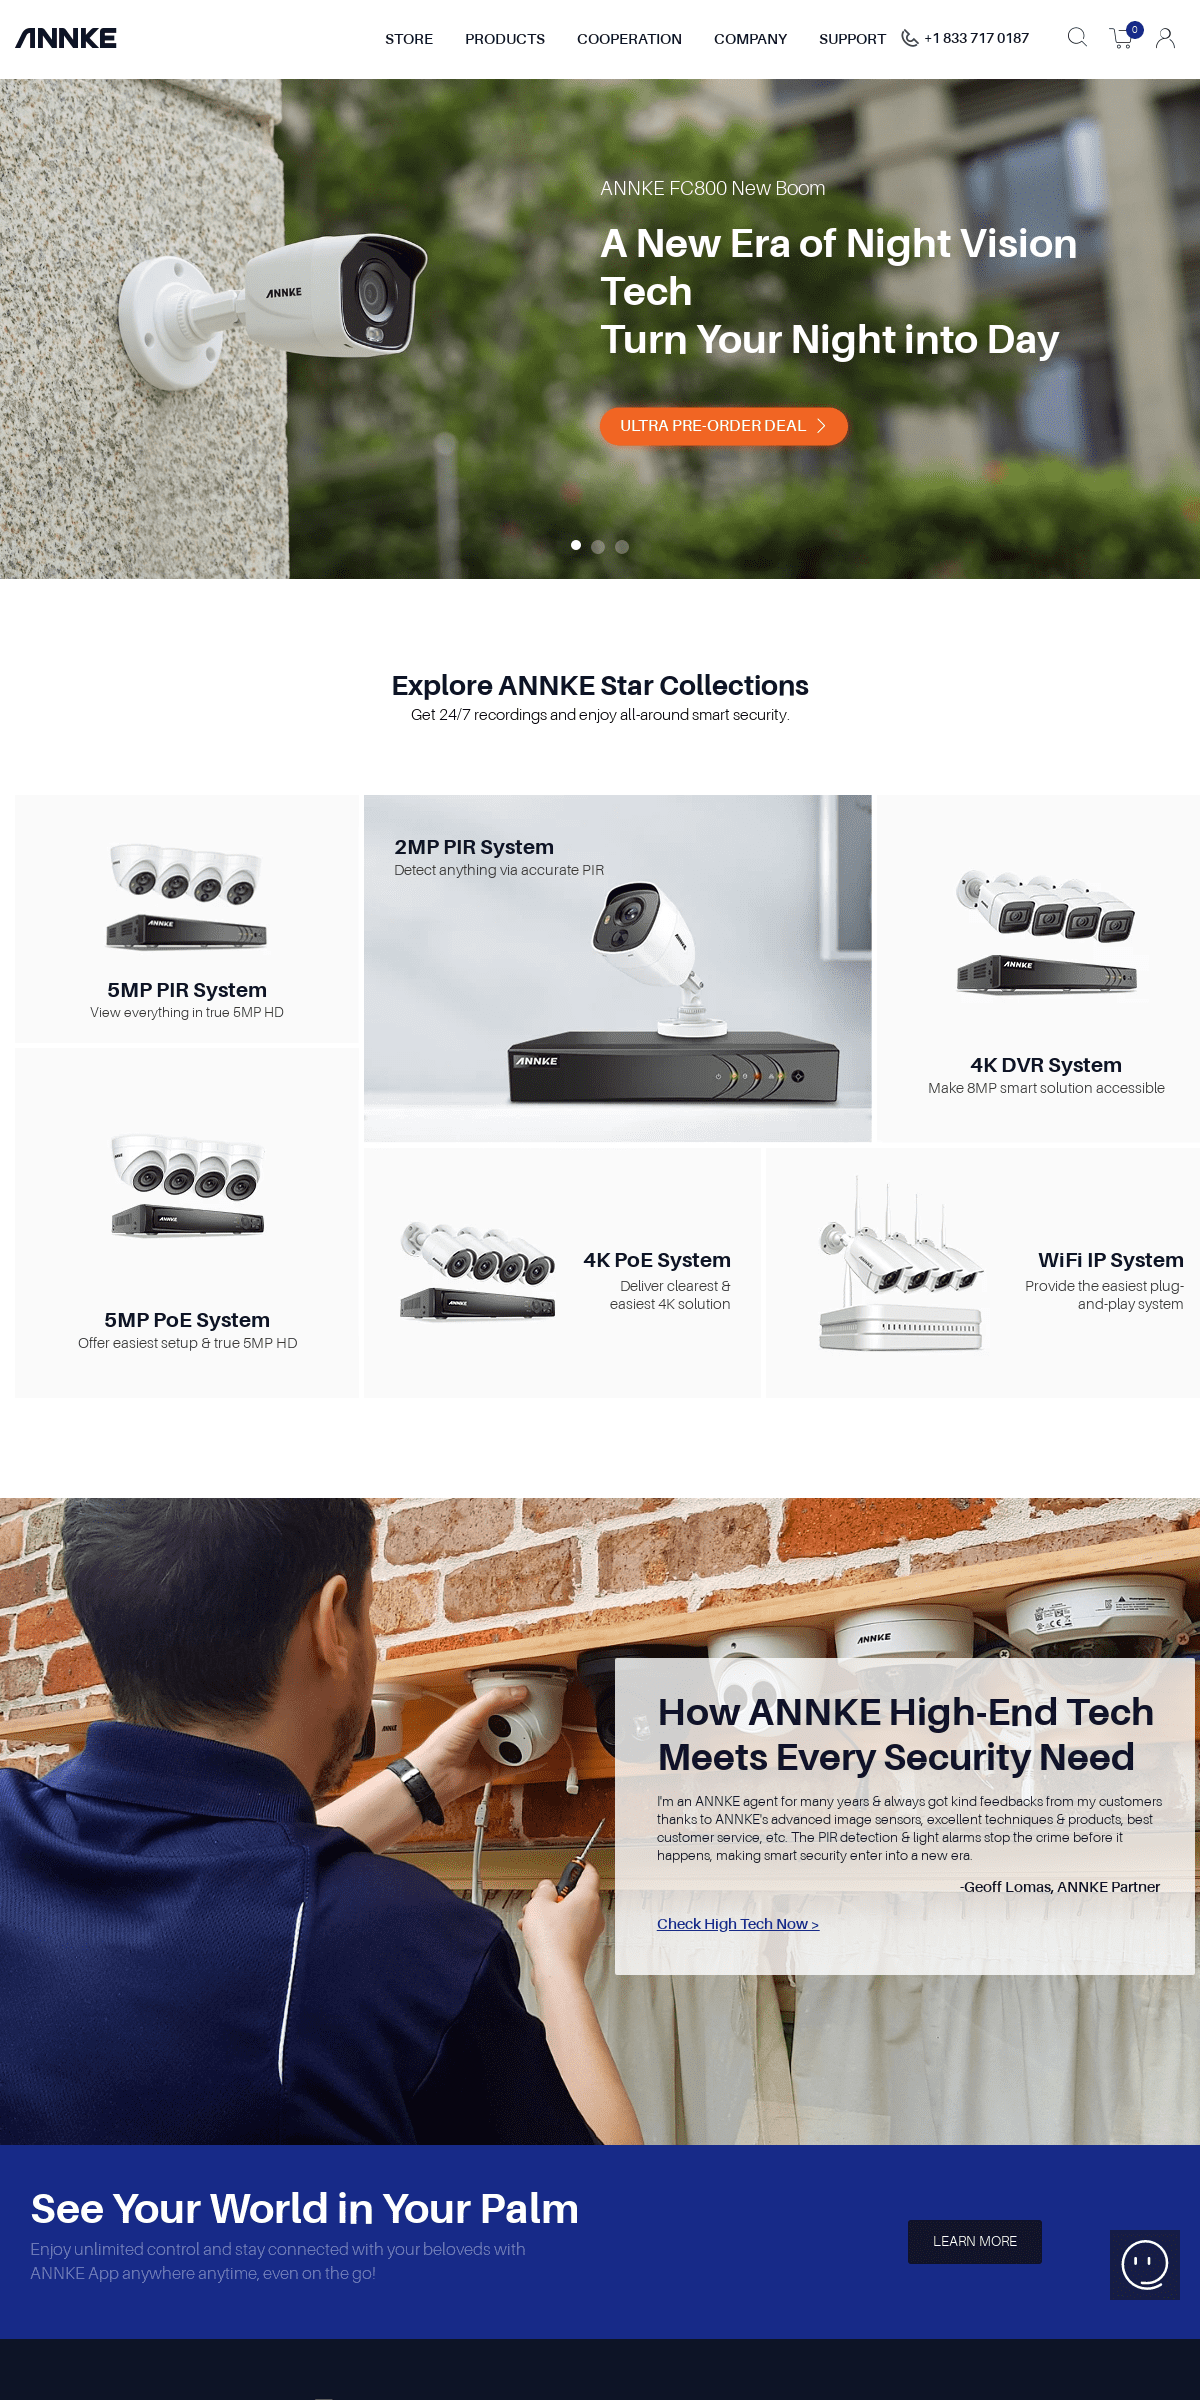 A complete backup of annke.com